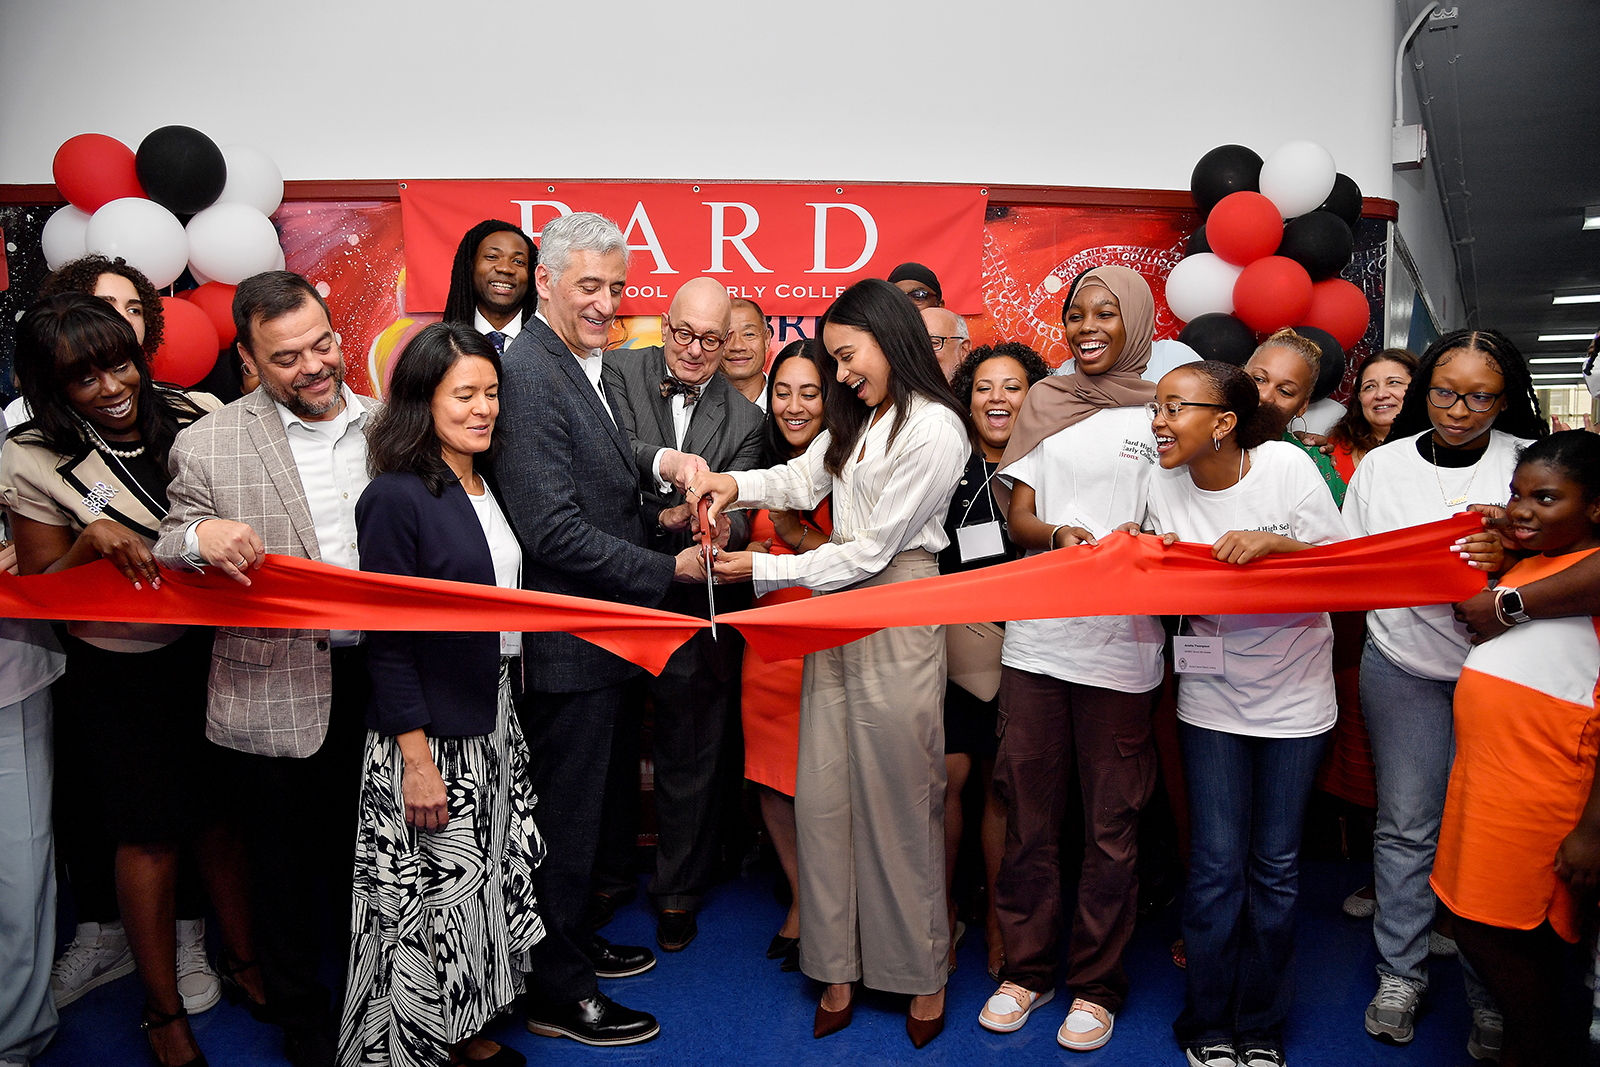 Bard College President Leon Botstein joins Saskia Brutsaert, Daniel Weisberg, Janet Peguero and community leaders and students in last year&#39;s ribbon-cutting ceremony for Bard High School Early College Bronx. The new Bard High School Early College Brooklyn opens September 2024. Photo by Danny Santana Photography